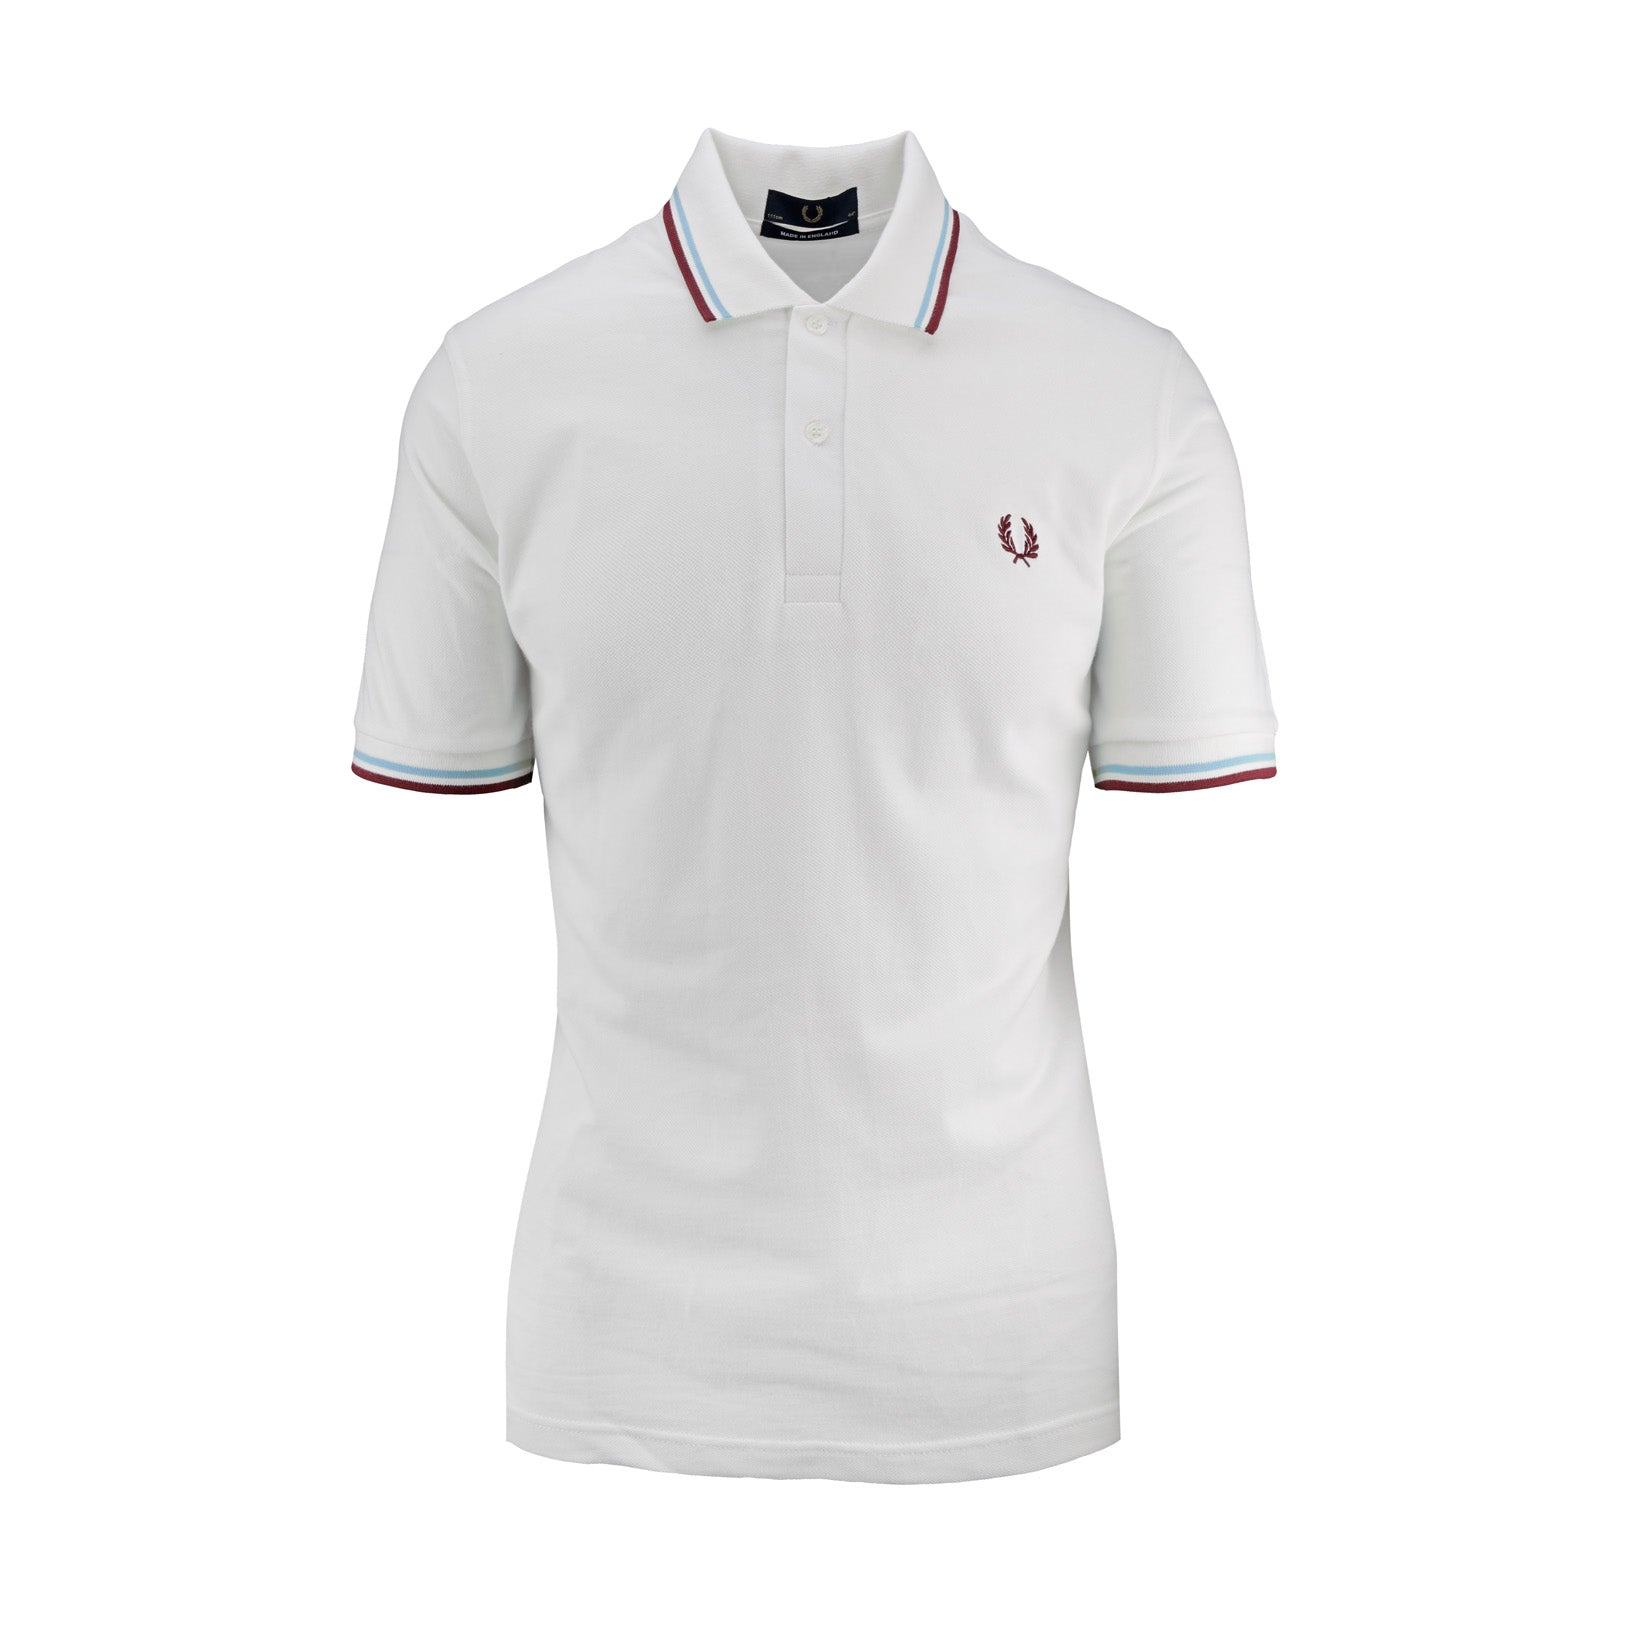 The Fred Perry Shirt G12